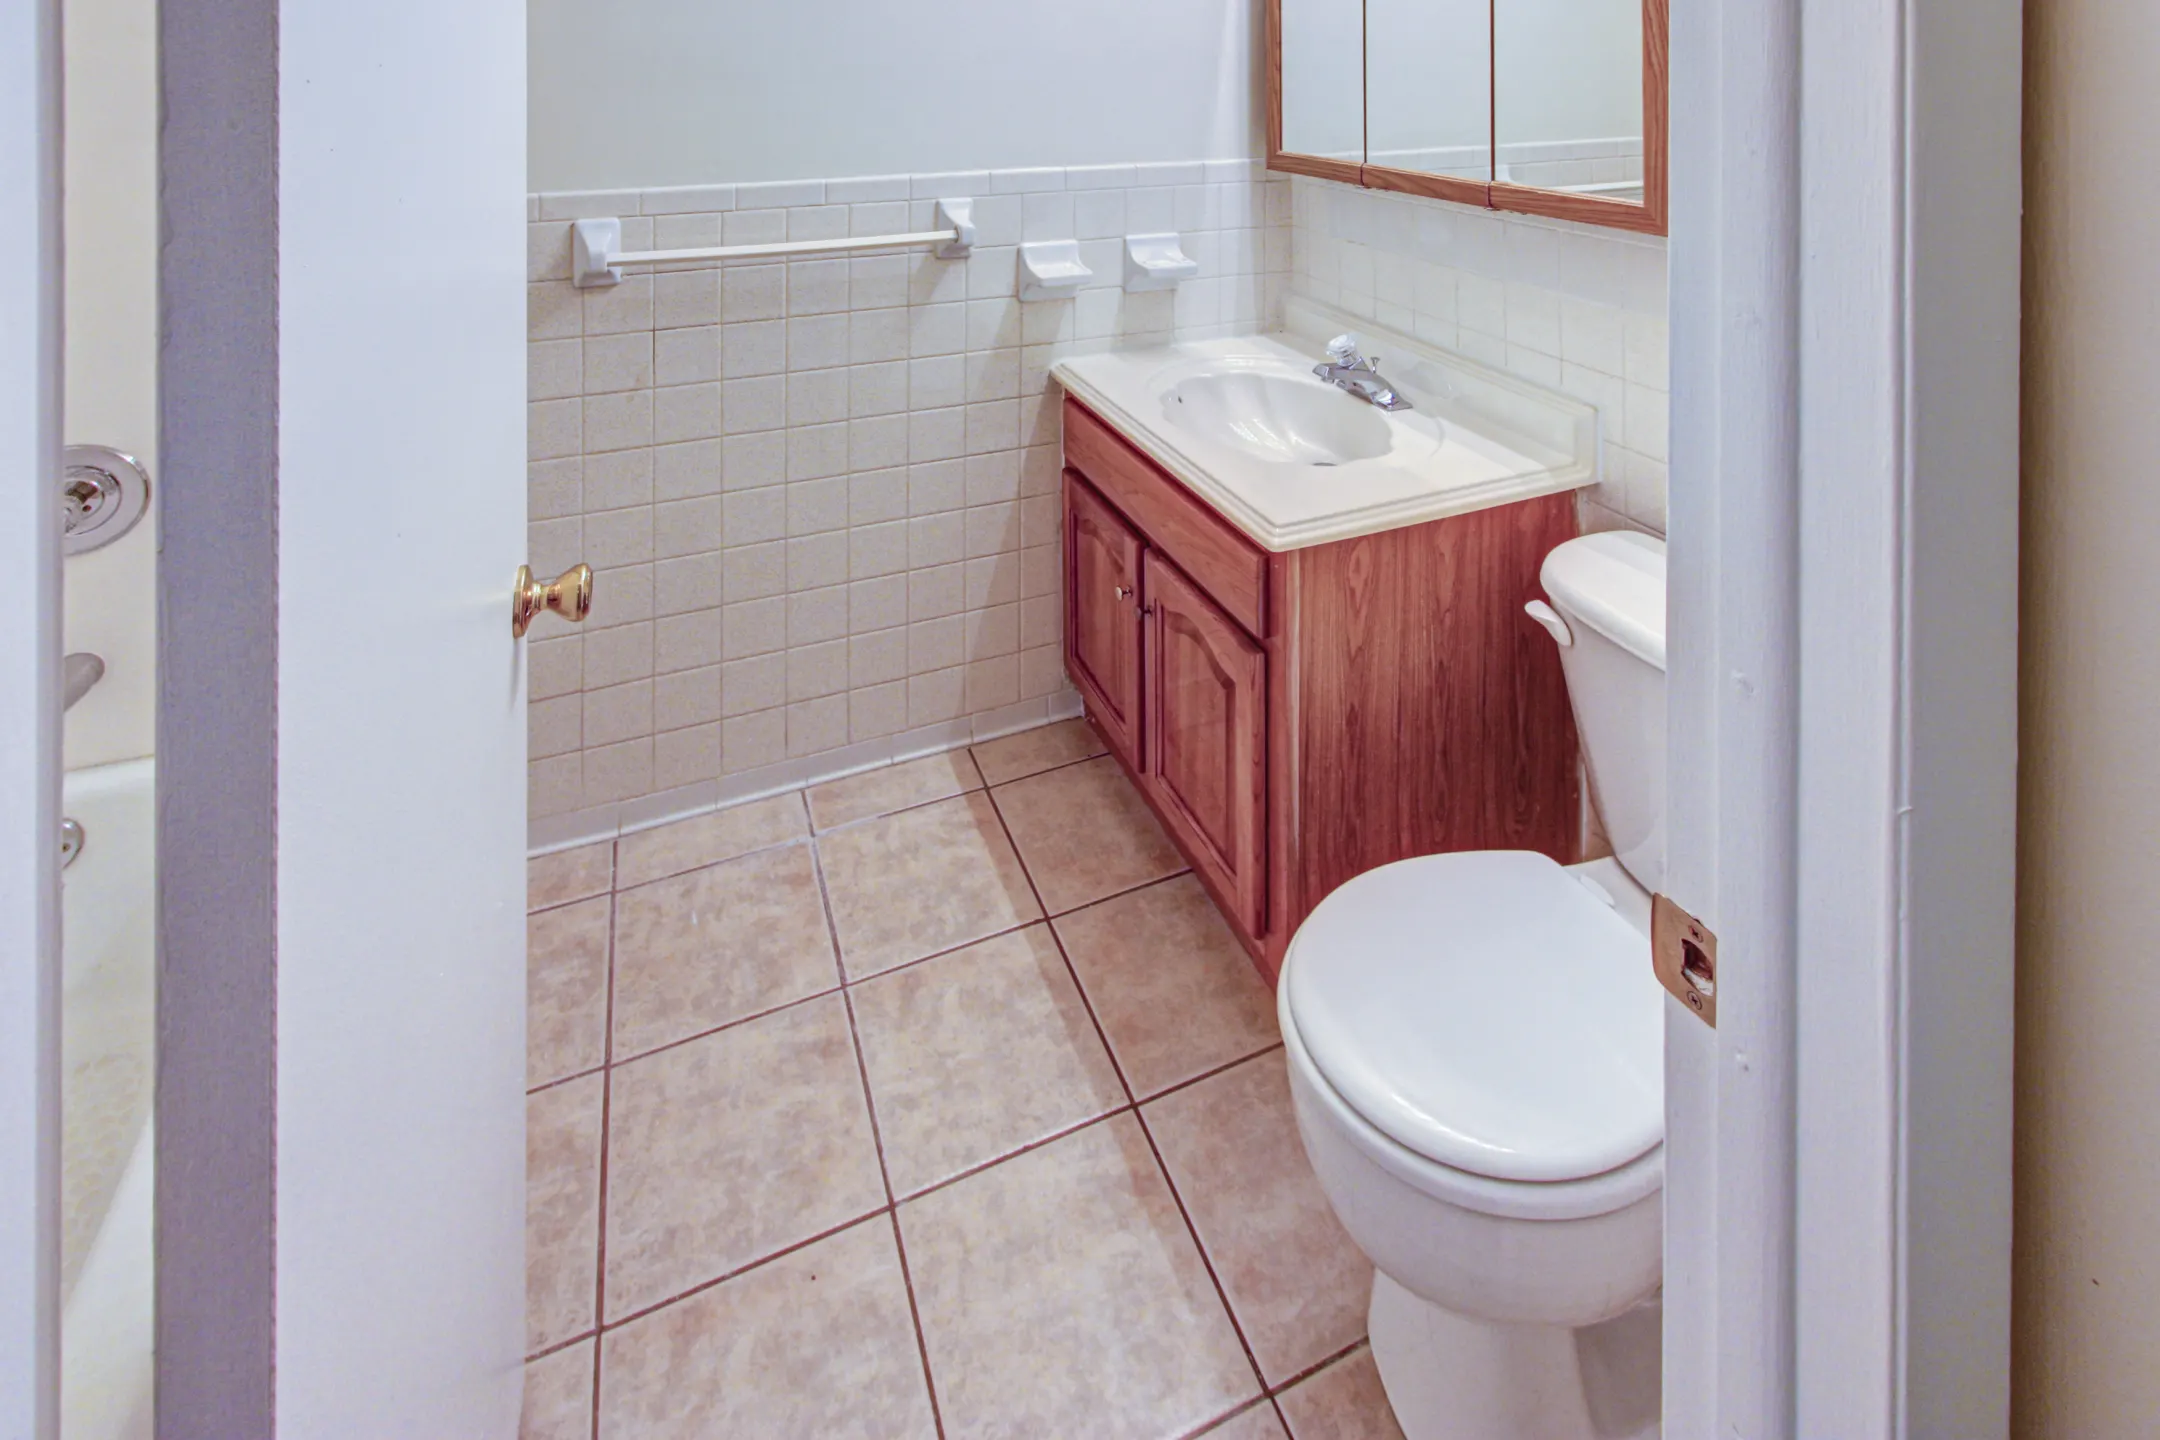 Bathroom - Presidential Townhome Rentals - Guilderland, NY